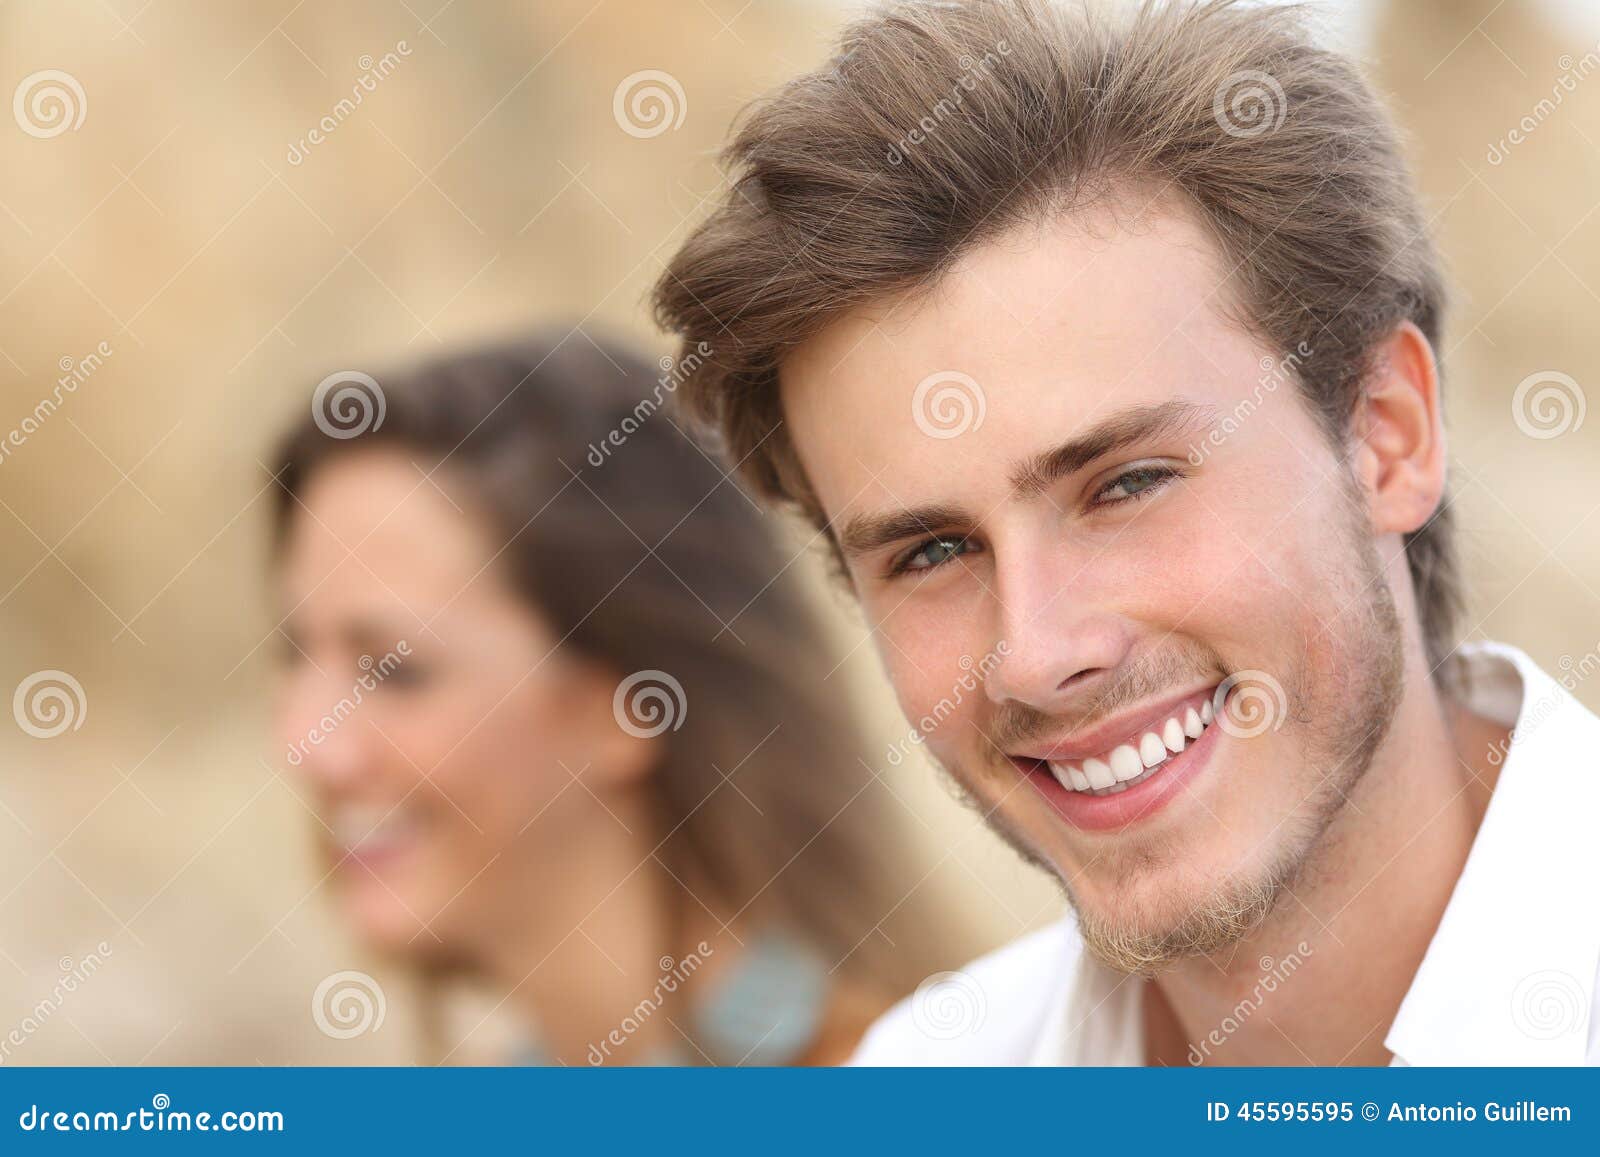 handsome man portrait with a perfect white tooth and smile